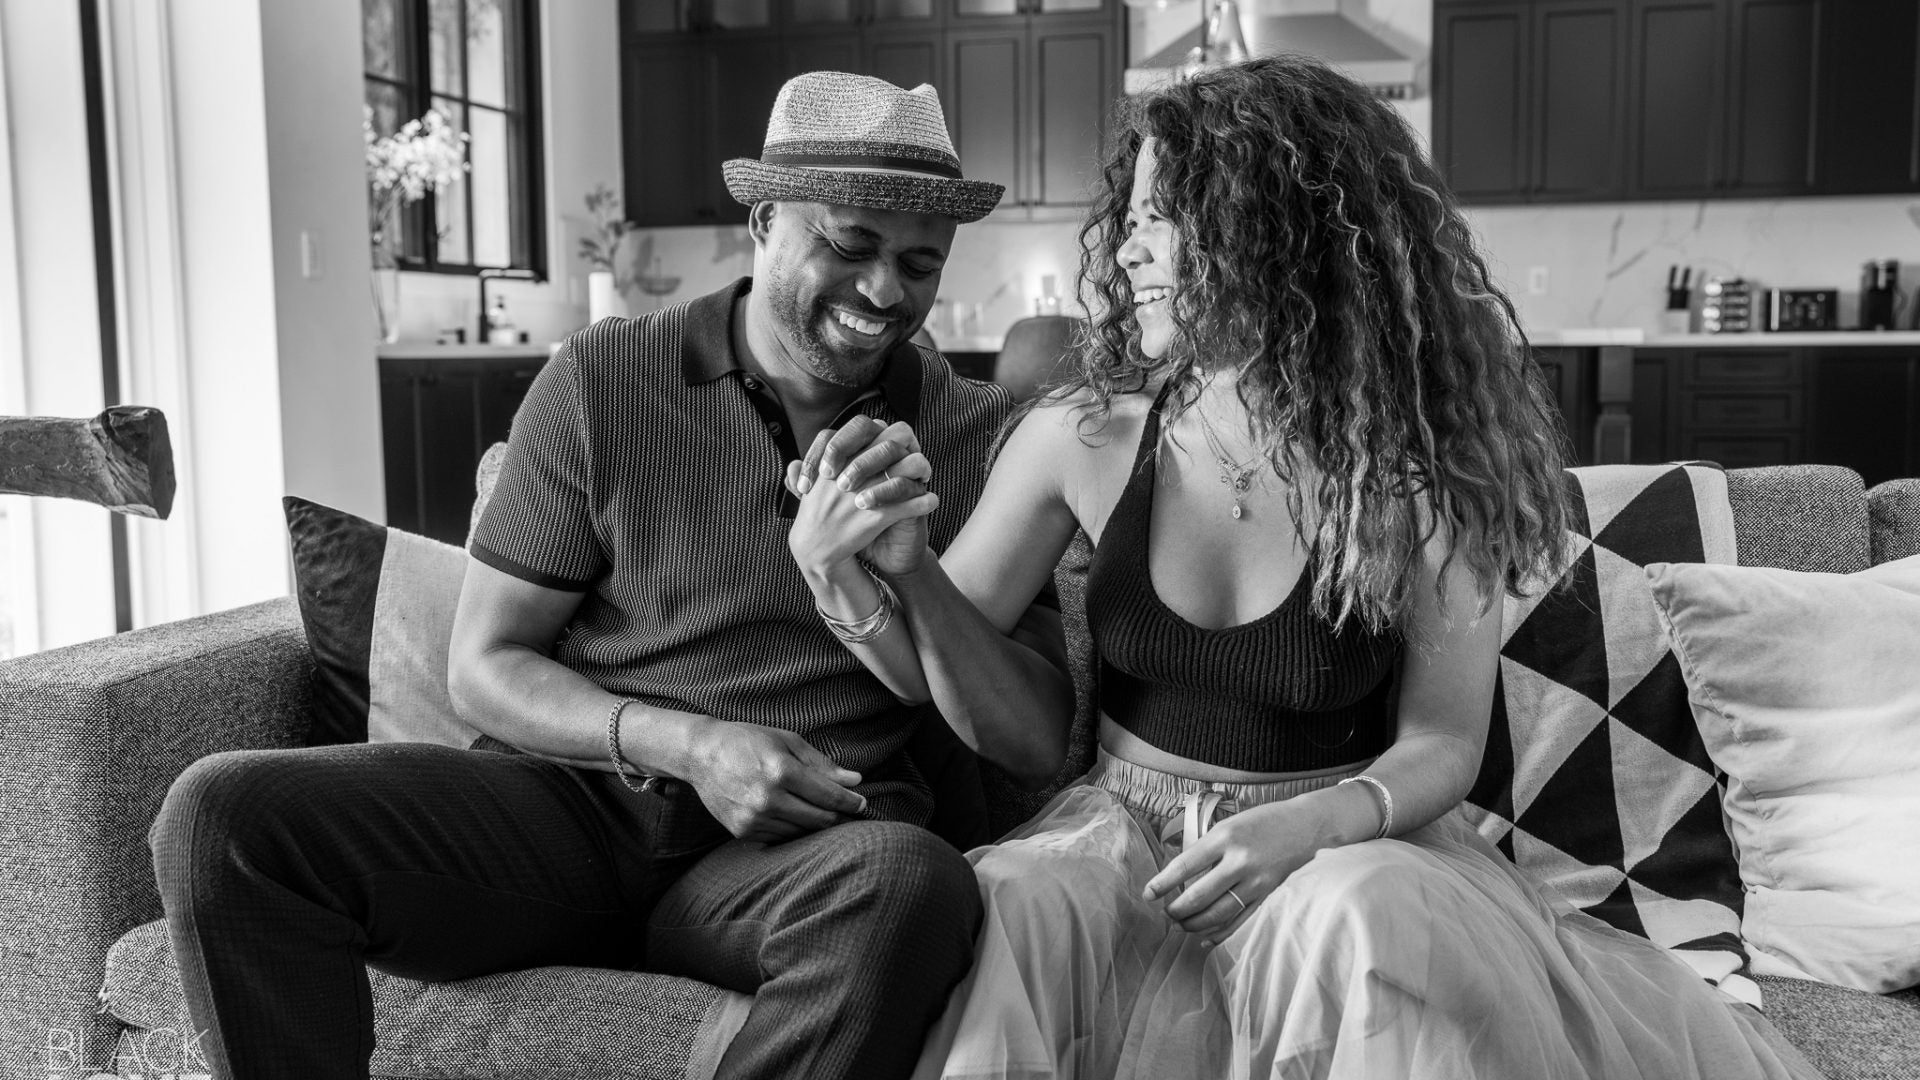 Father Noir: The Man Behind 'Black Love' Put Together A Stunning Project Celebrating Black Fathers